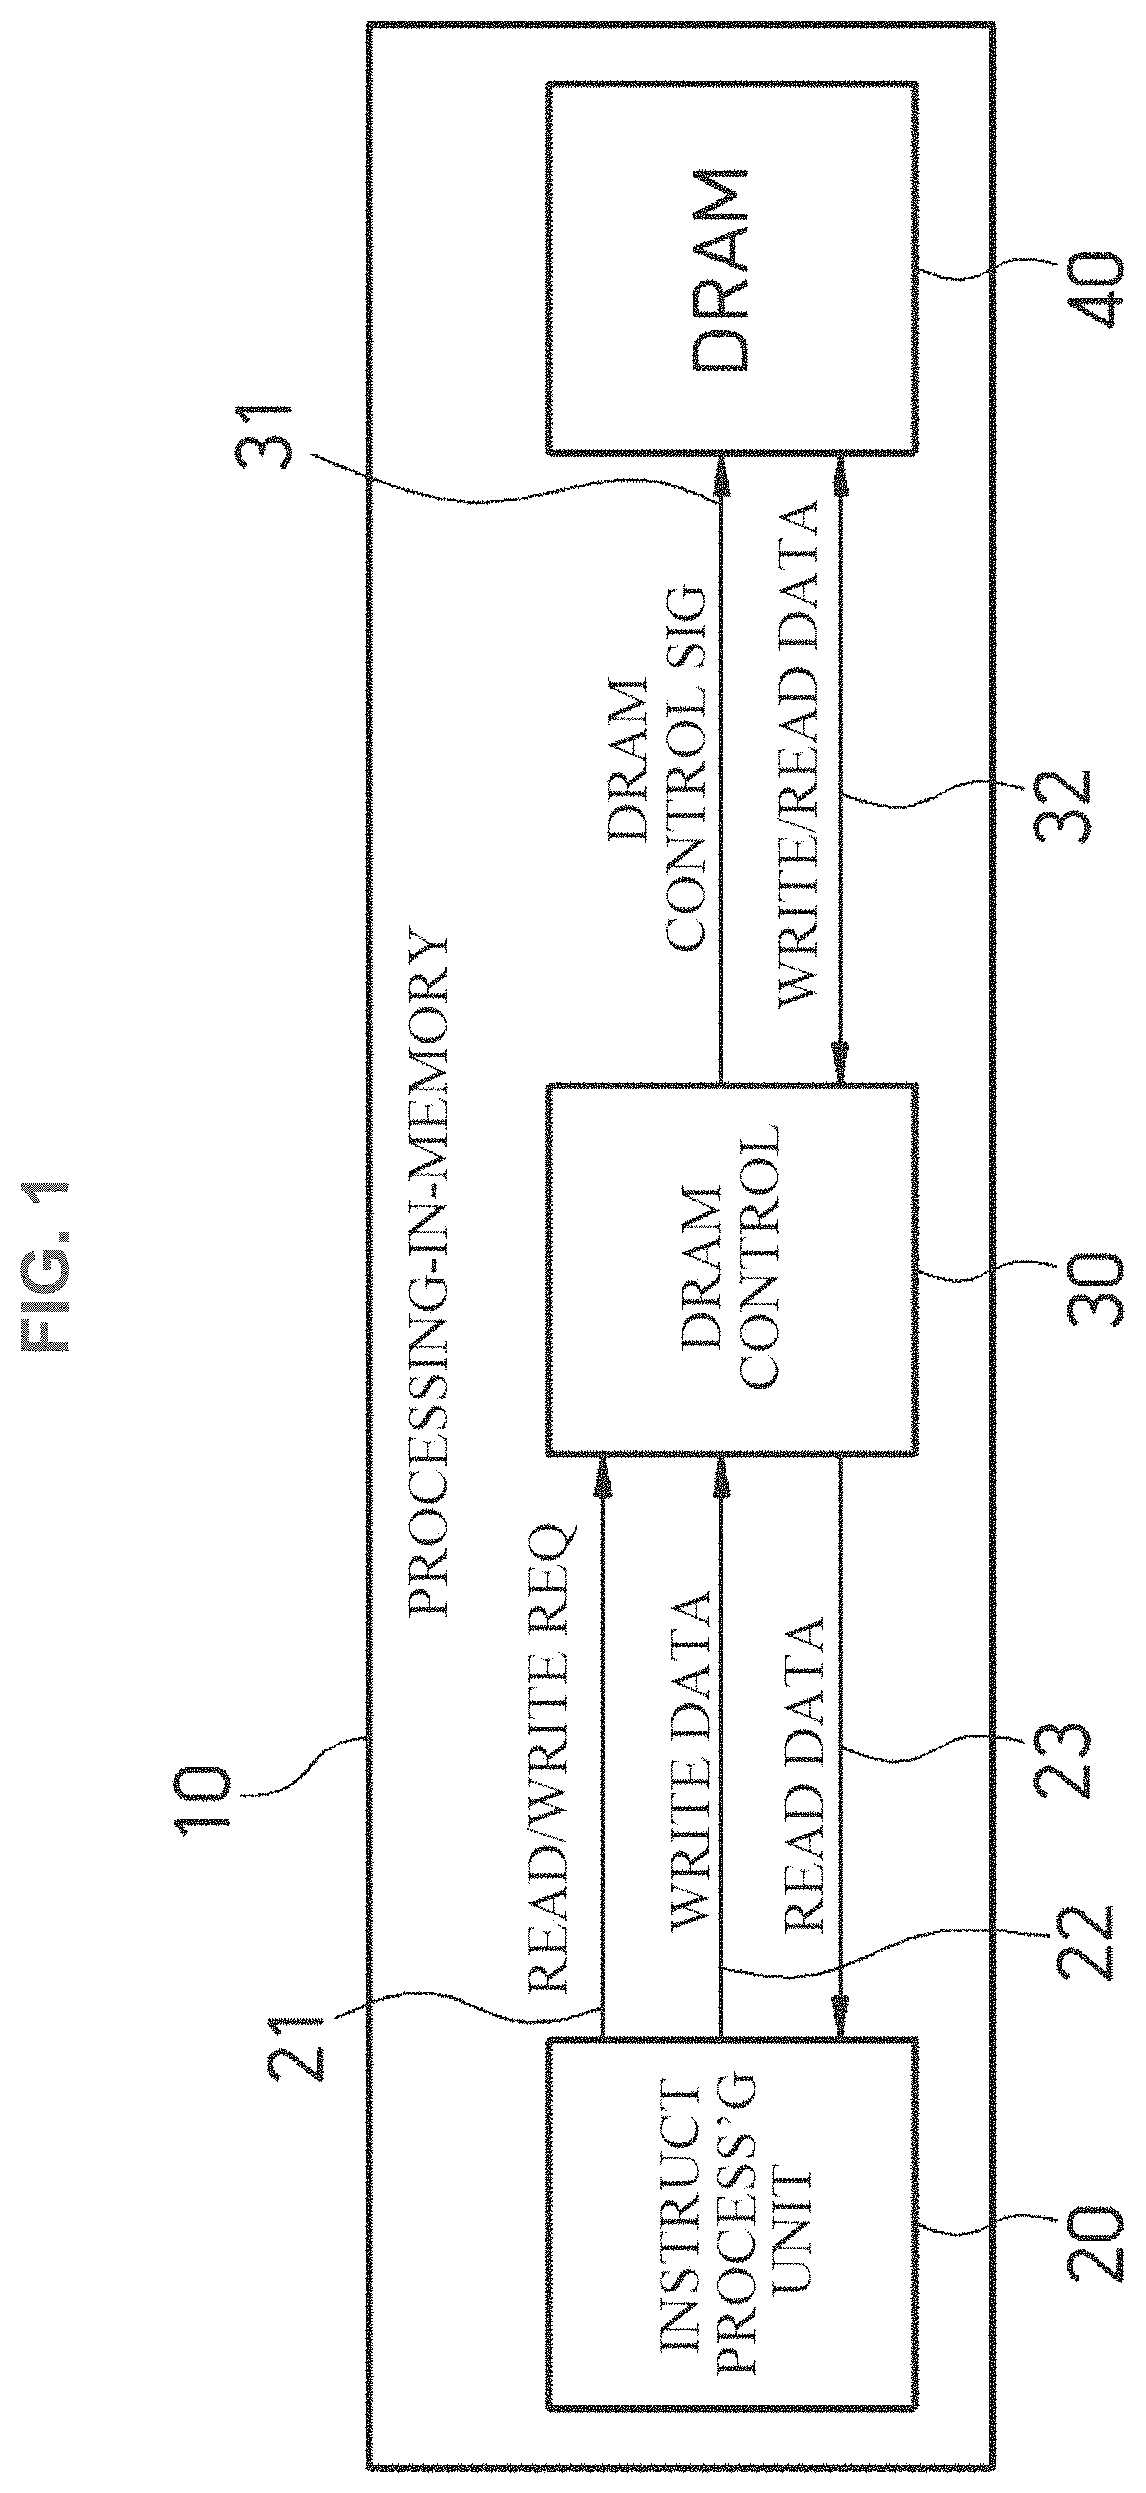 Memory management method and apparatus for processing-in-memory